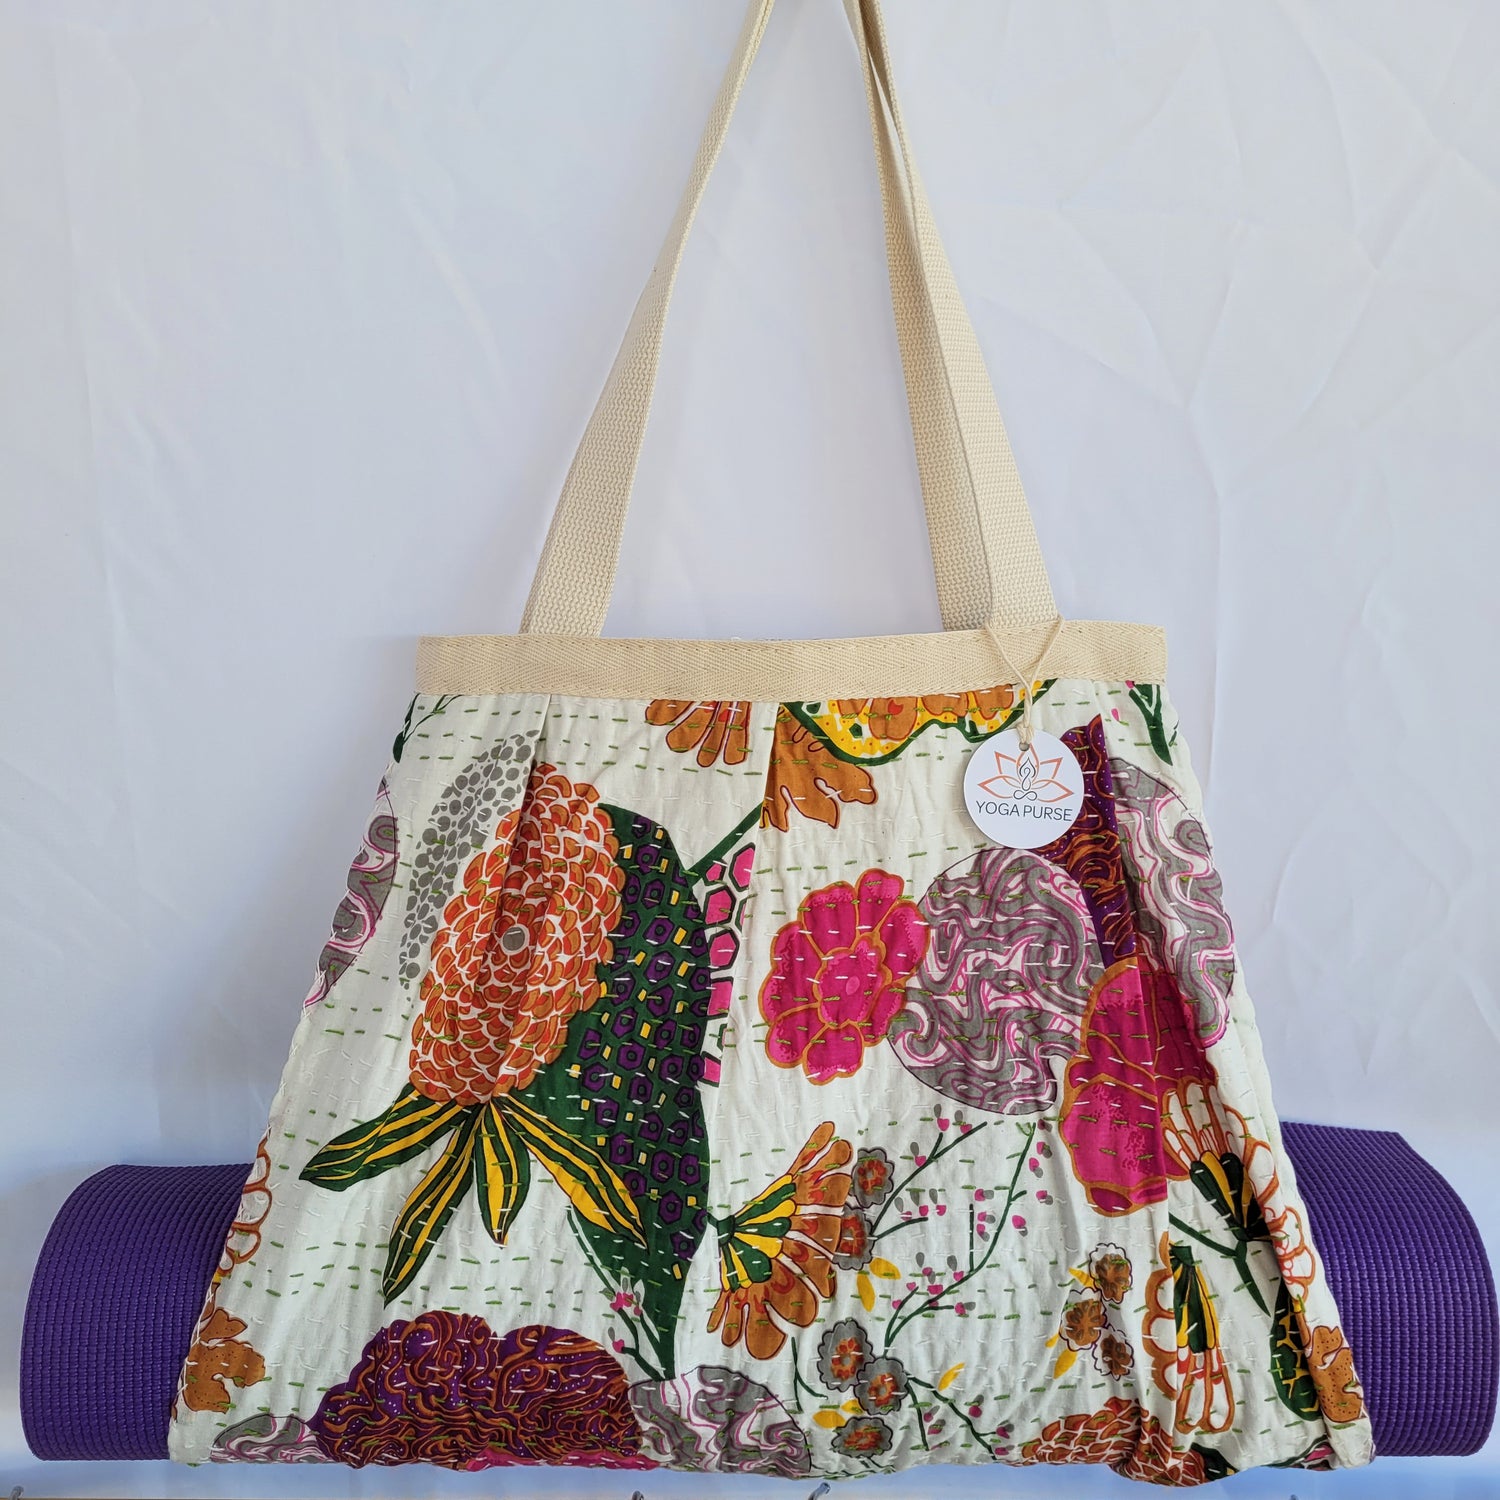 yoga purse with tote bag